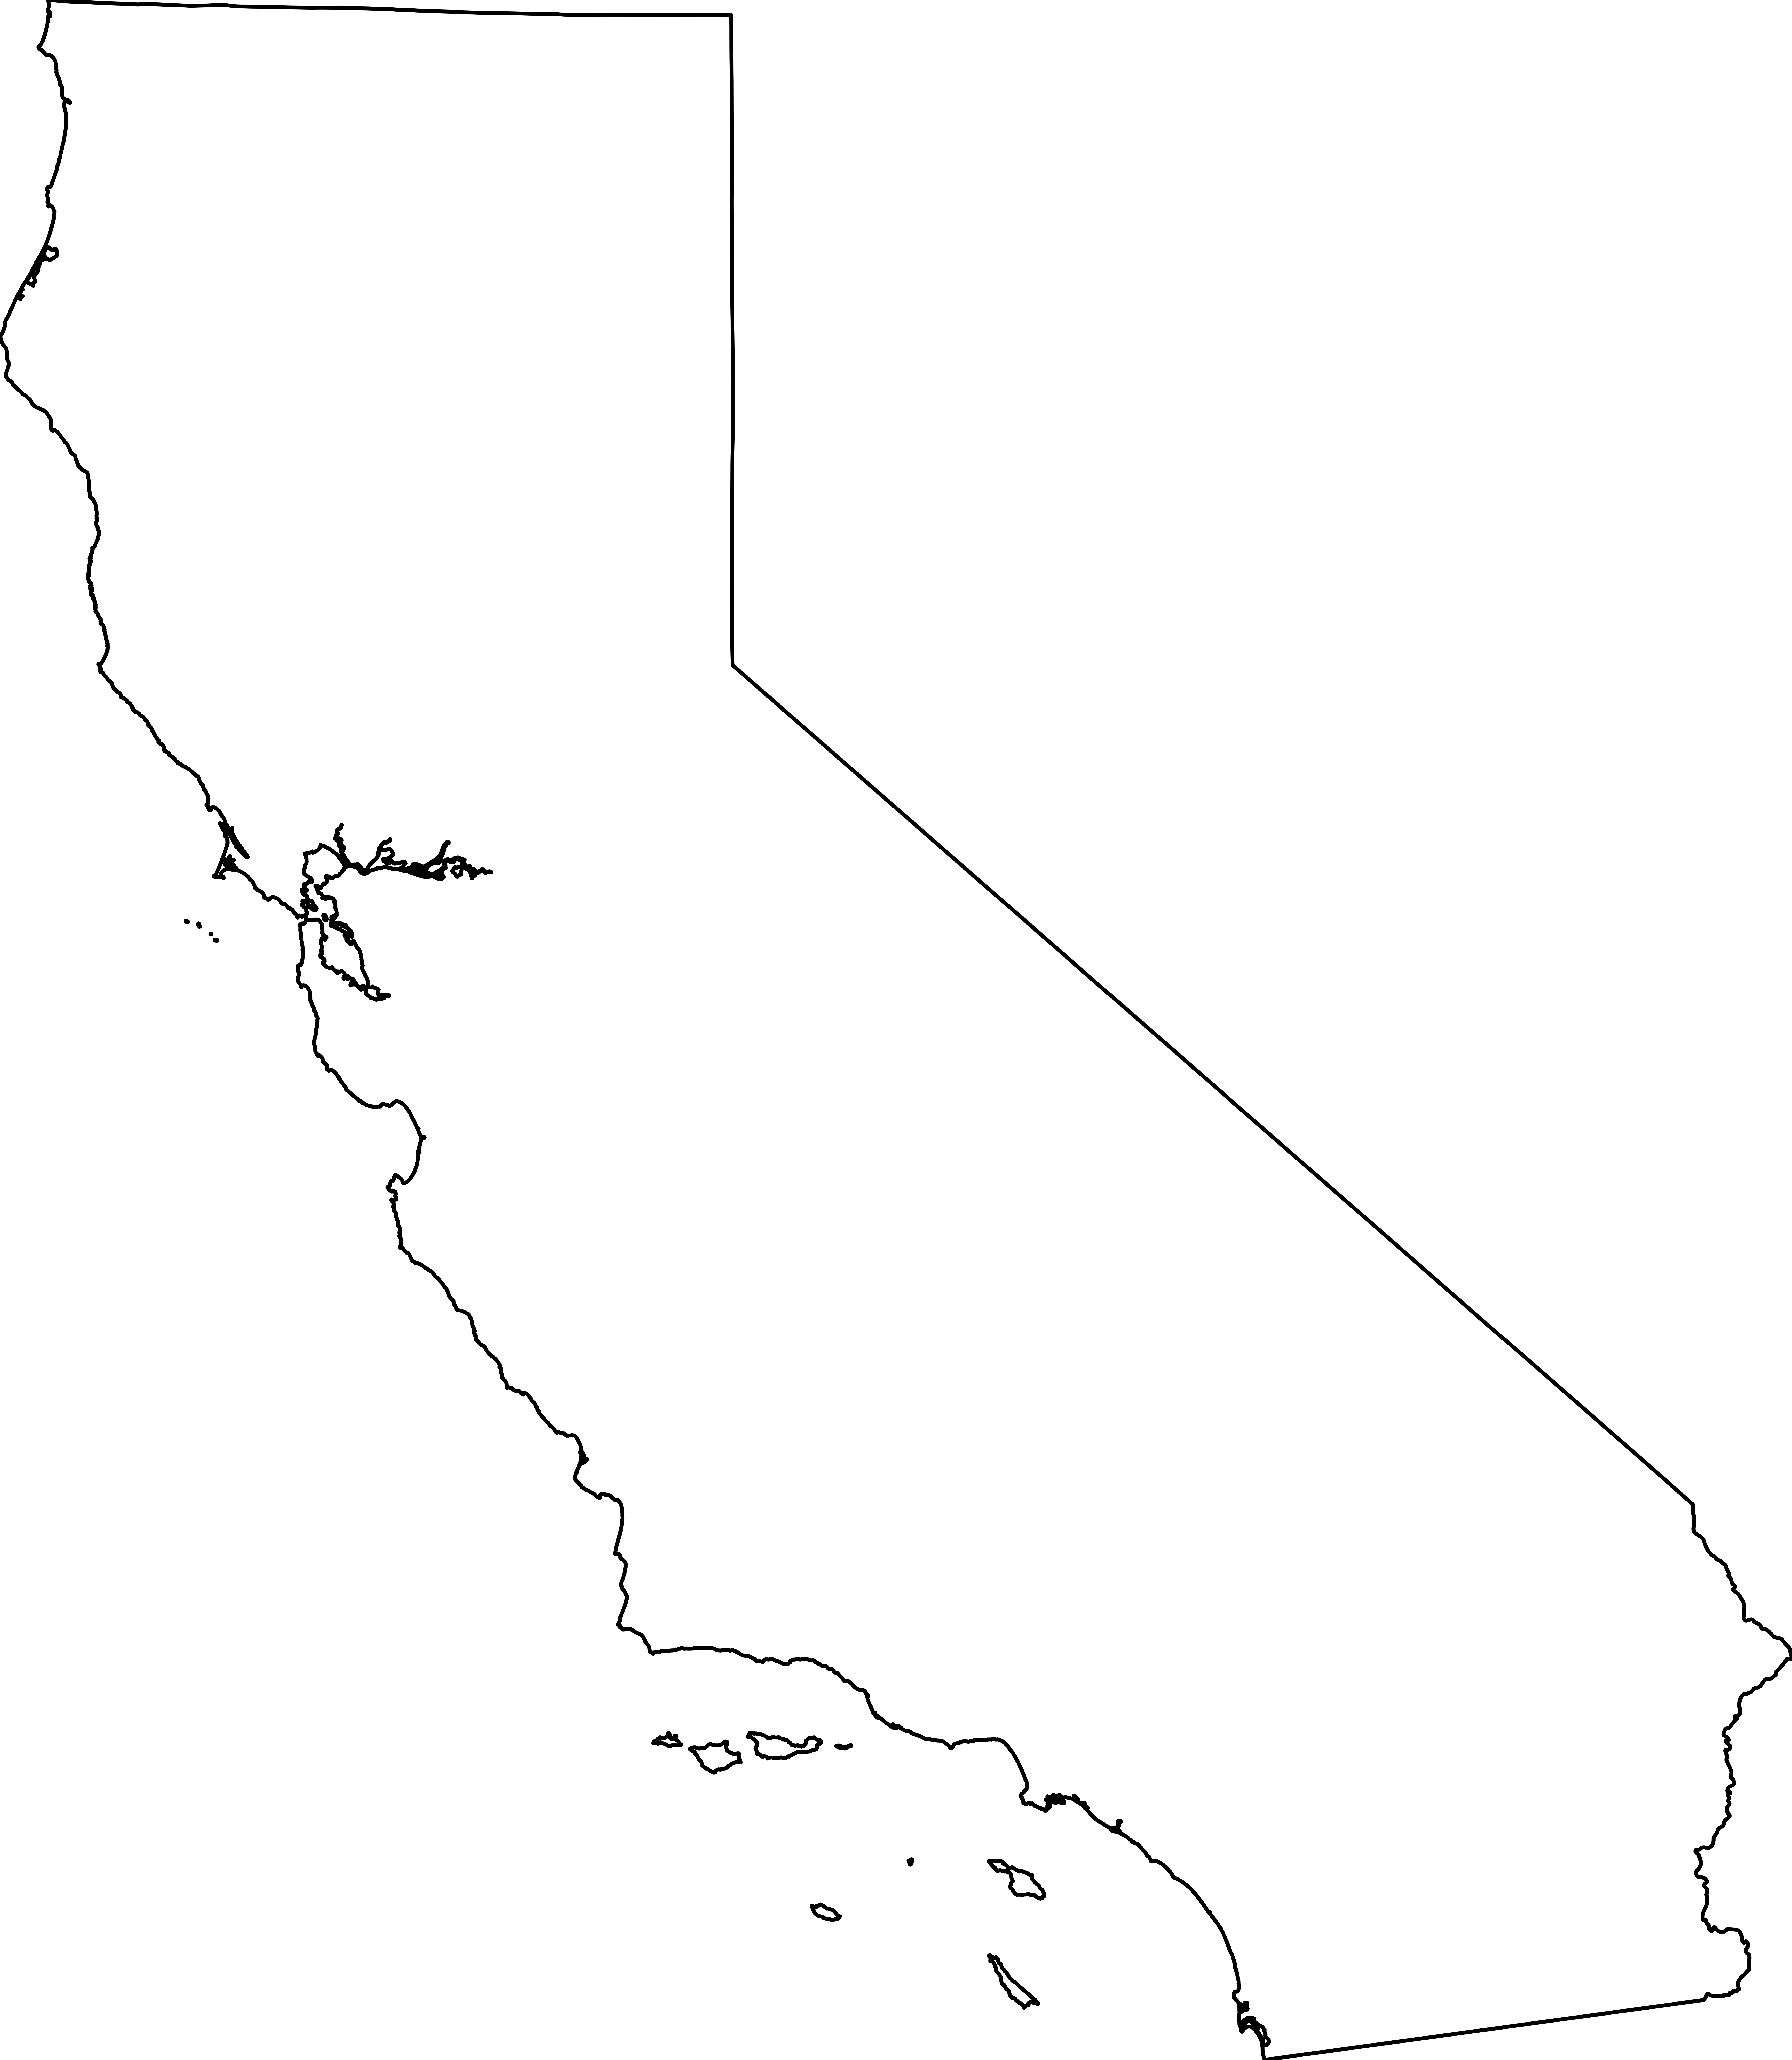 Outline Of California Map File:Map of California outline.svg   Wikimedia Commons